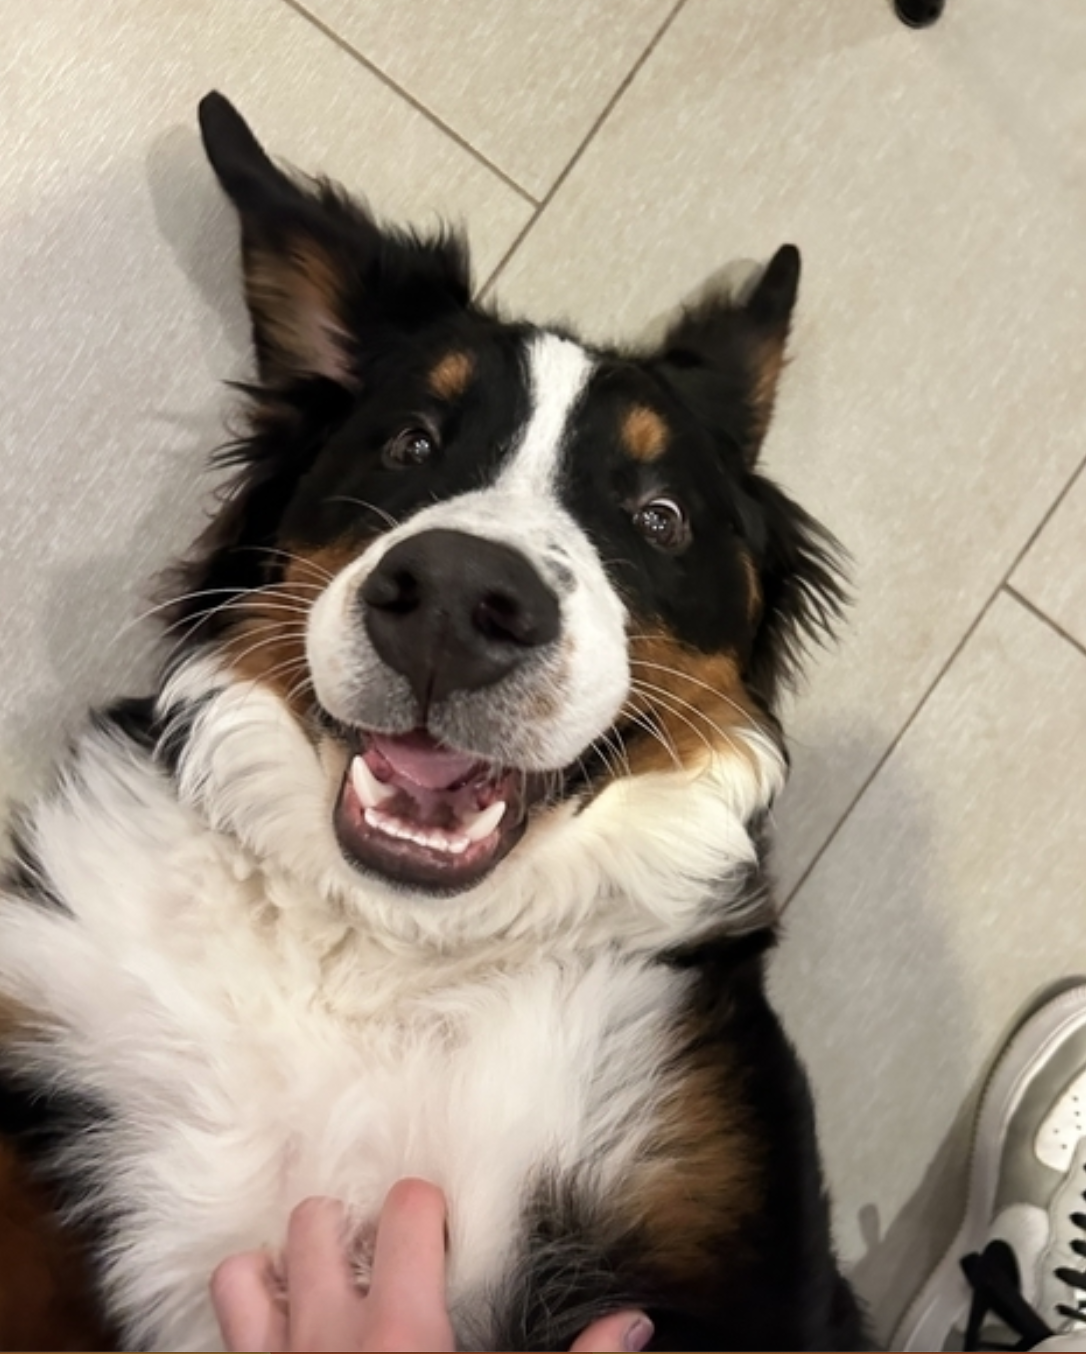 A happy Australian Shepherd lying on the floor being petted by a person